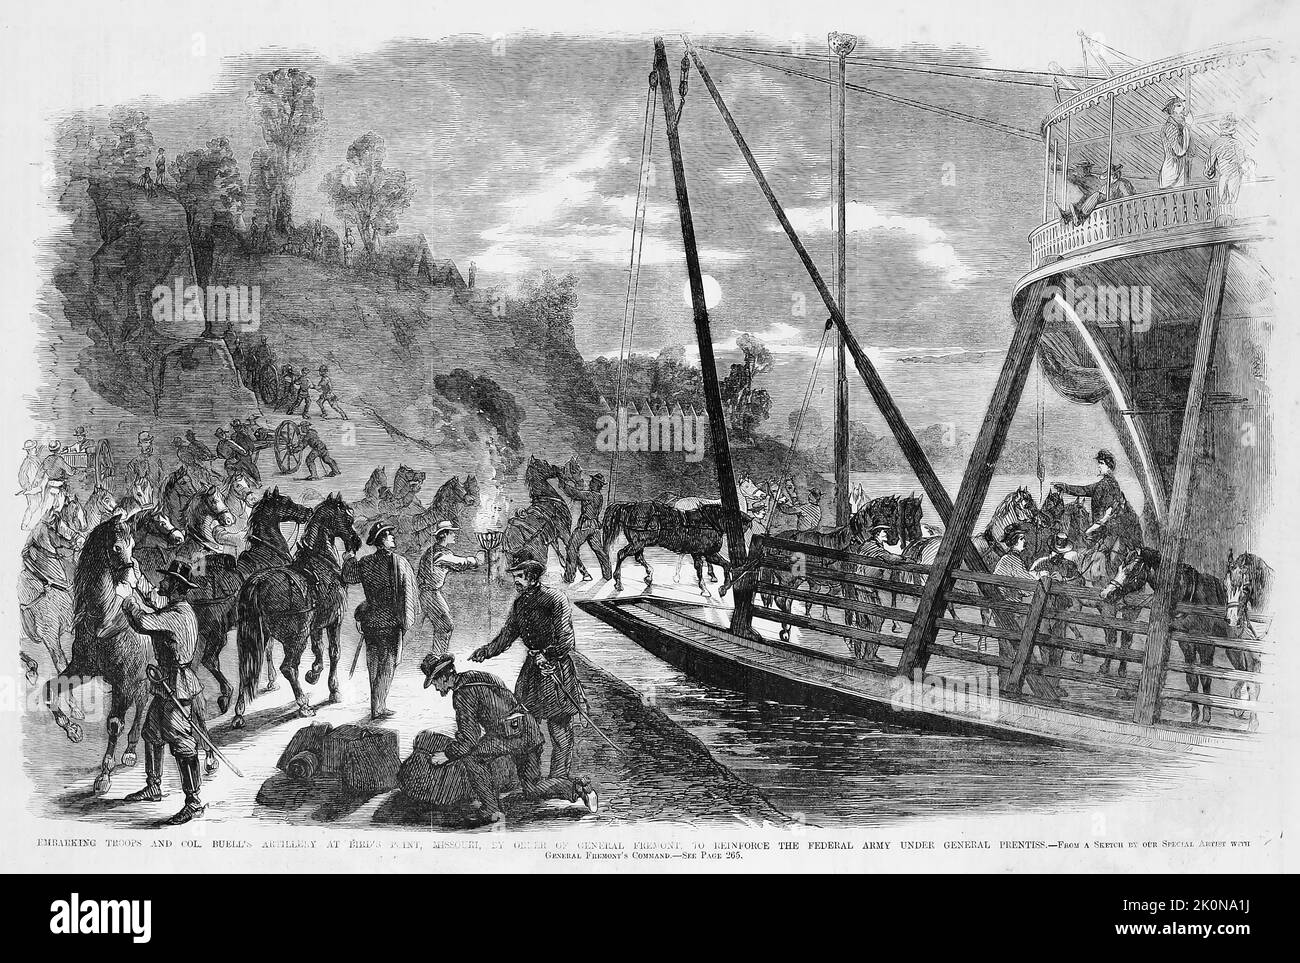 Embarking the troops and Colonel Don Carlos Buell's artillery at Bird's Point, Missouri, by order of General John Charles Frémont, to reinforce the Federal Army under General Benjamin Mayberry Prentiss. September 1861. 19th century American Civil War illustration from Frank Leslie's Illustrated Newspaper Stock Photo